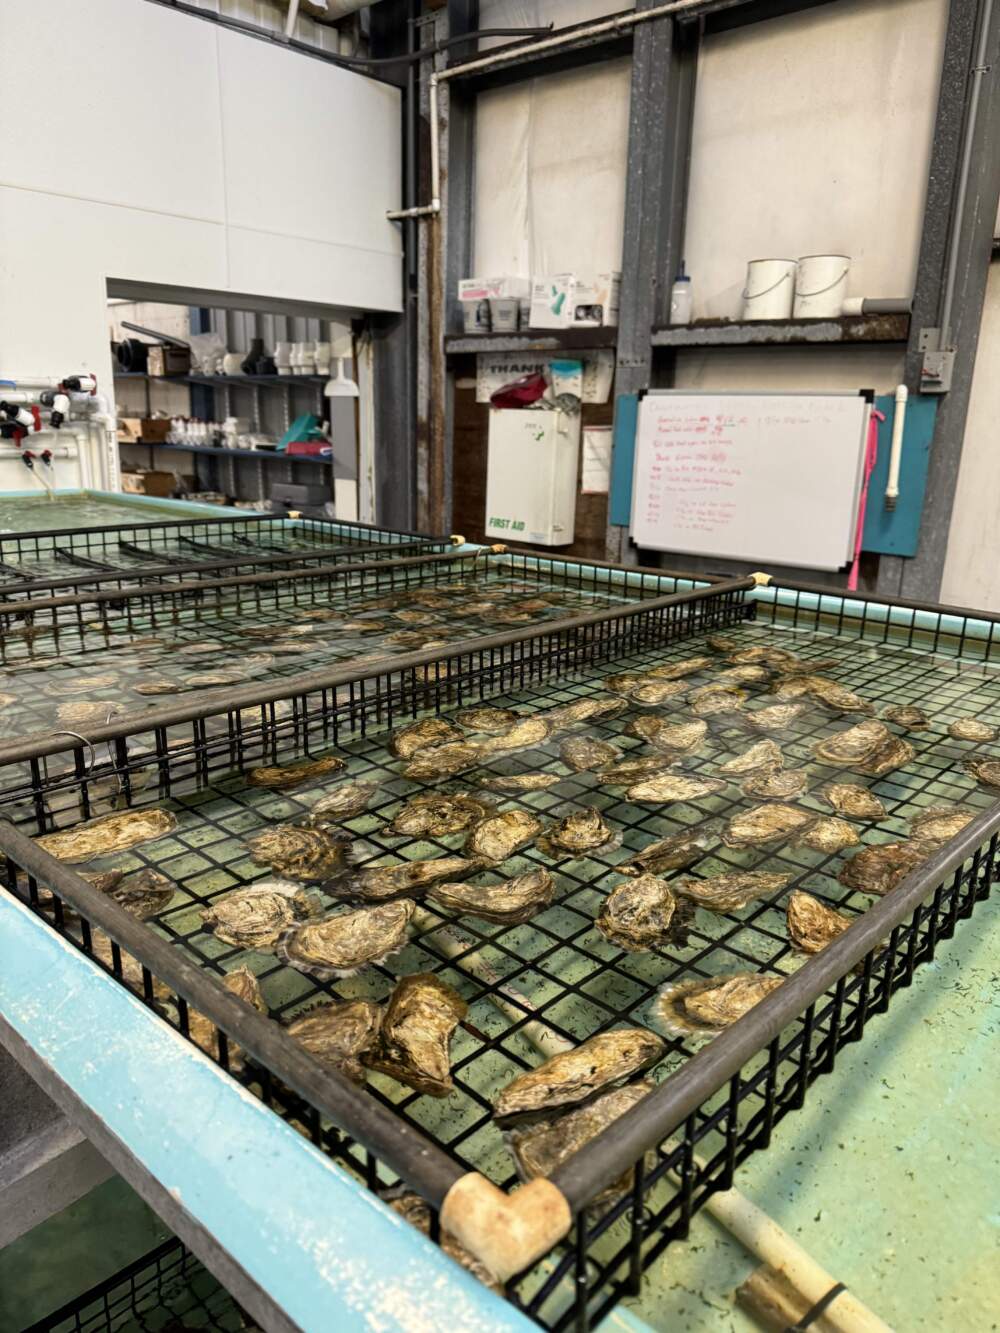 Oysters at the Taylor Shellfish hatchery in Dabob Bay, Washington. (Chris Bentley/Here & Now)